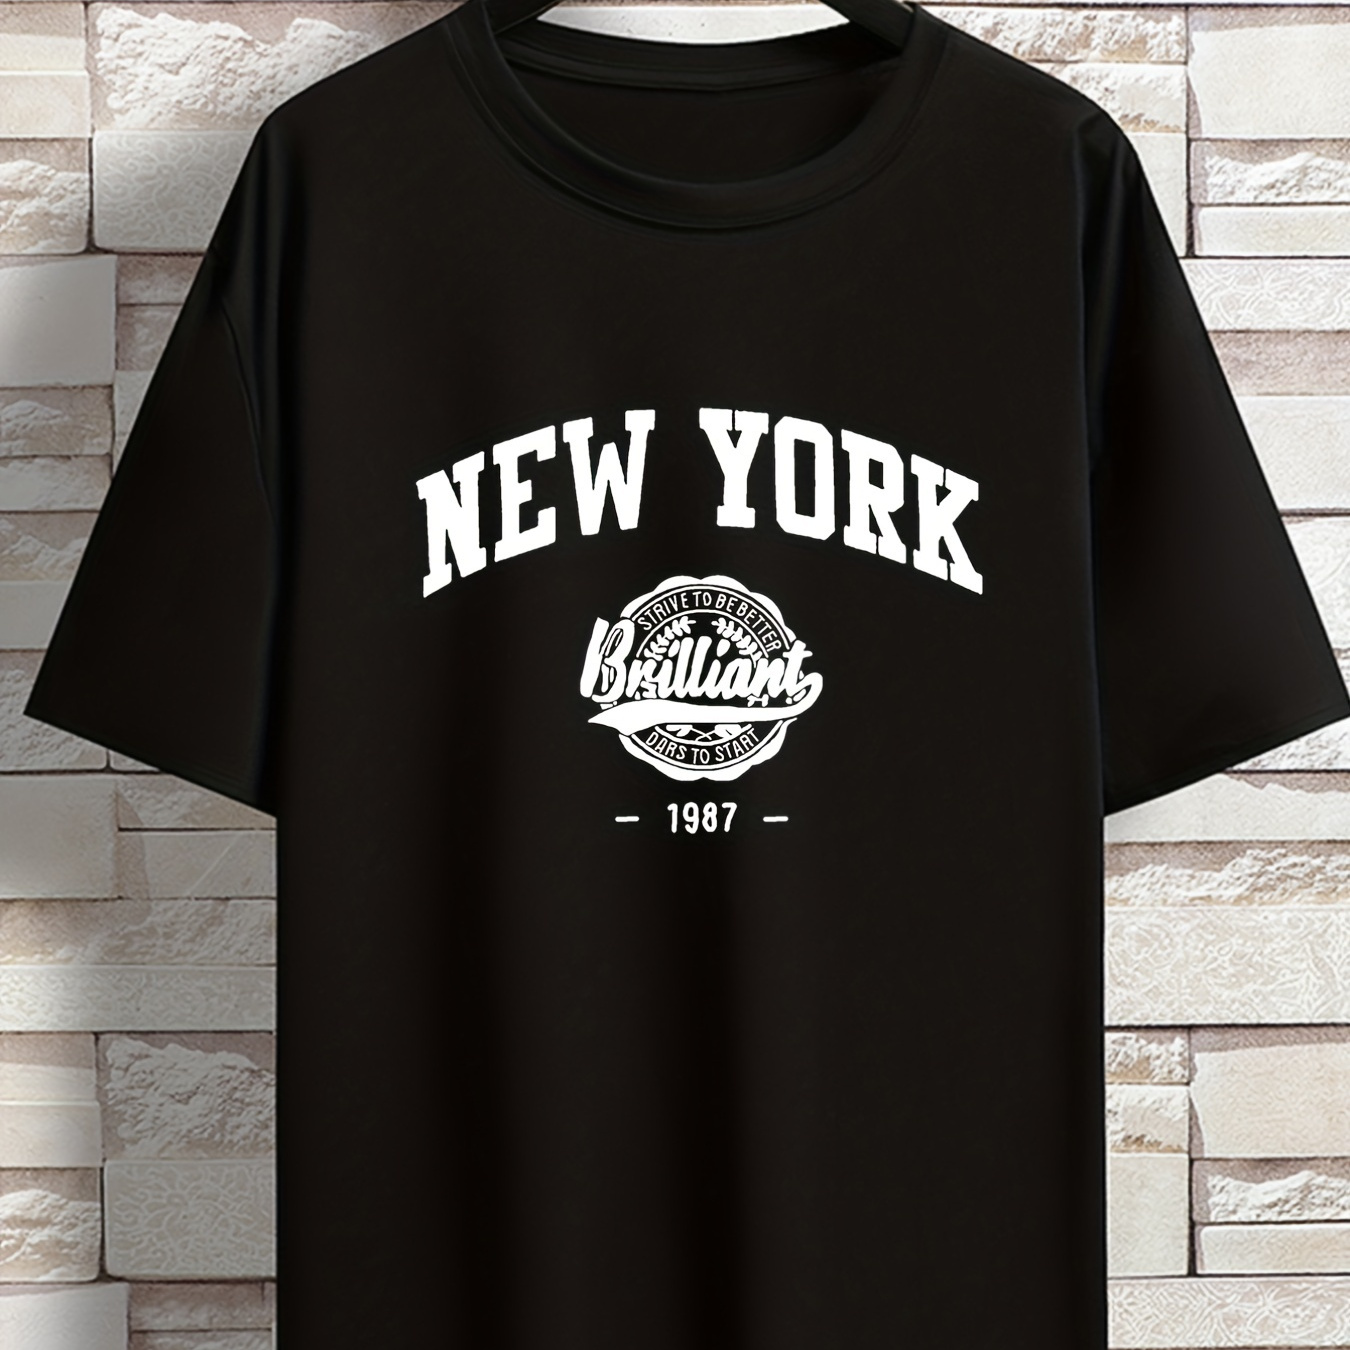 

Plus Size Men's Casual Graphic Tees For Summer, "new York" Print Crew Neck Oversized T-shirts, Trendy Chic Outfit Men's Clothings